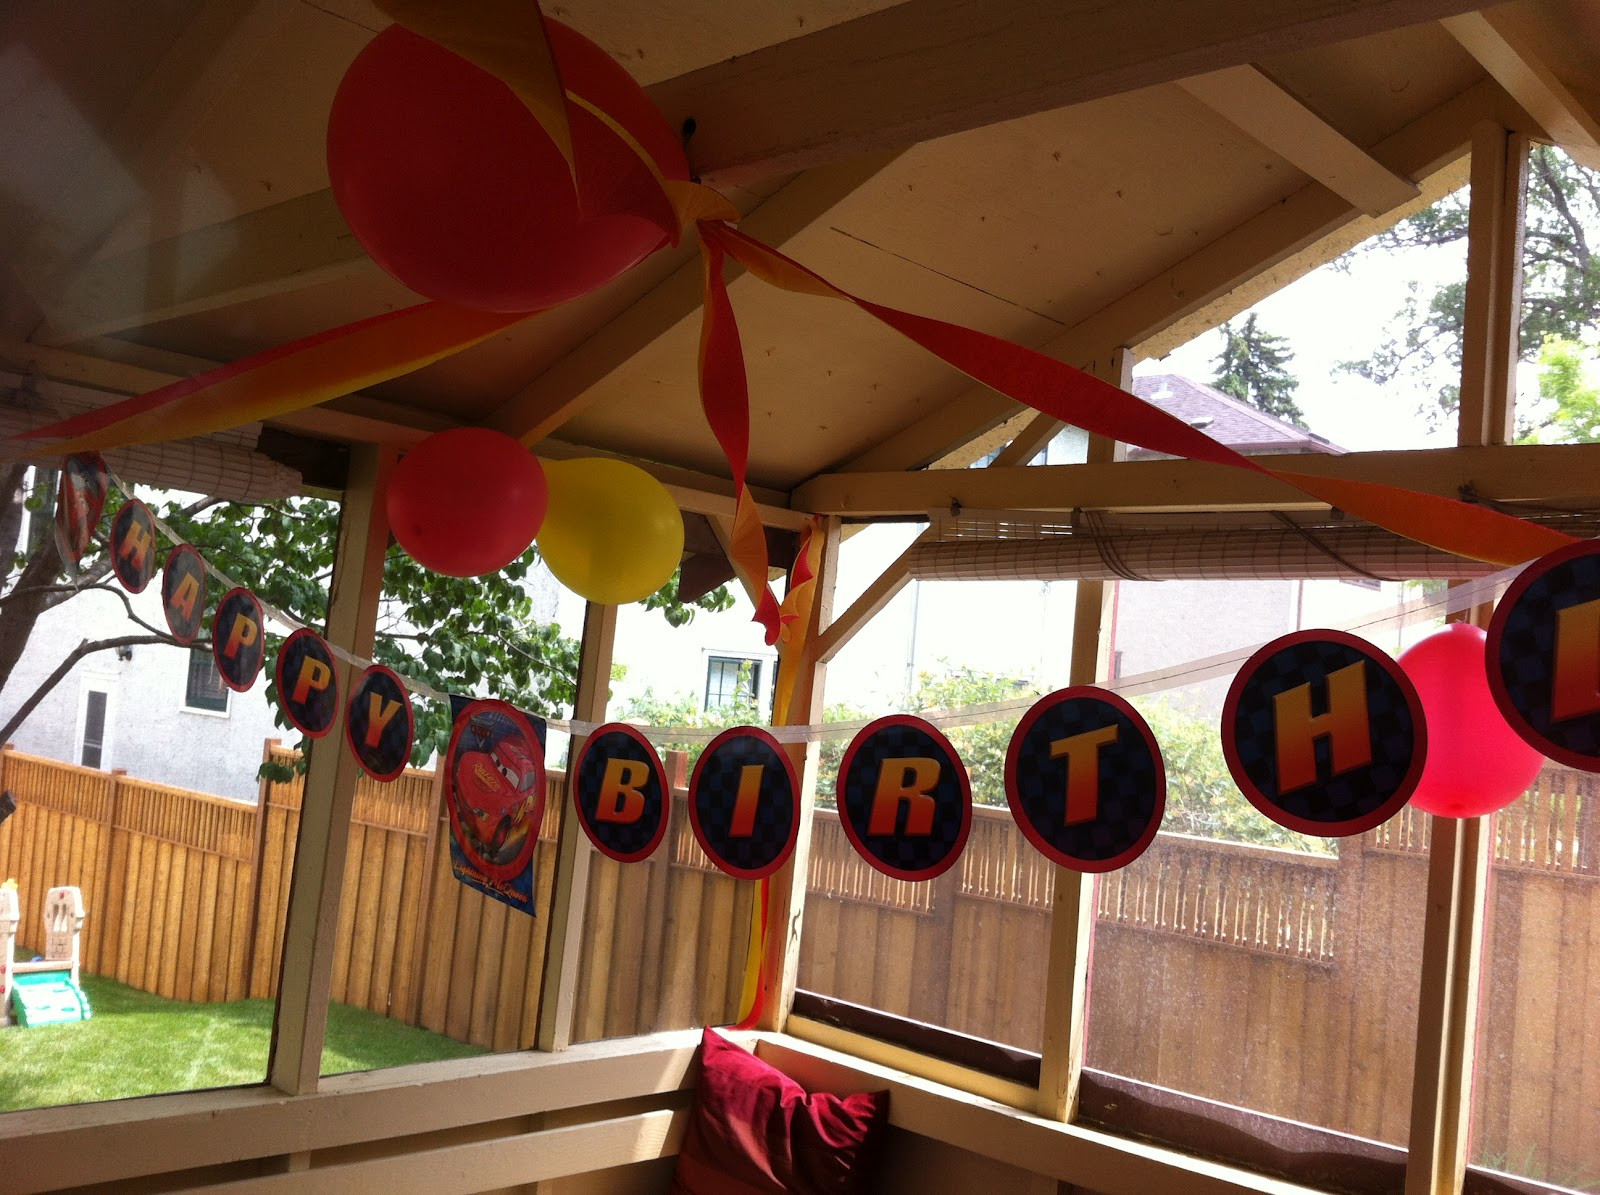 Birthday Car Decorations
 Our Disney Cars Theme Birthday Party Decorations Games